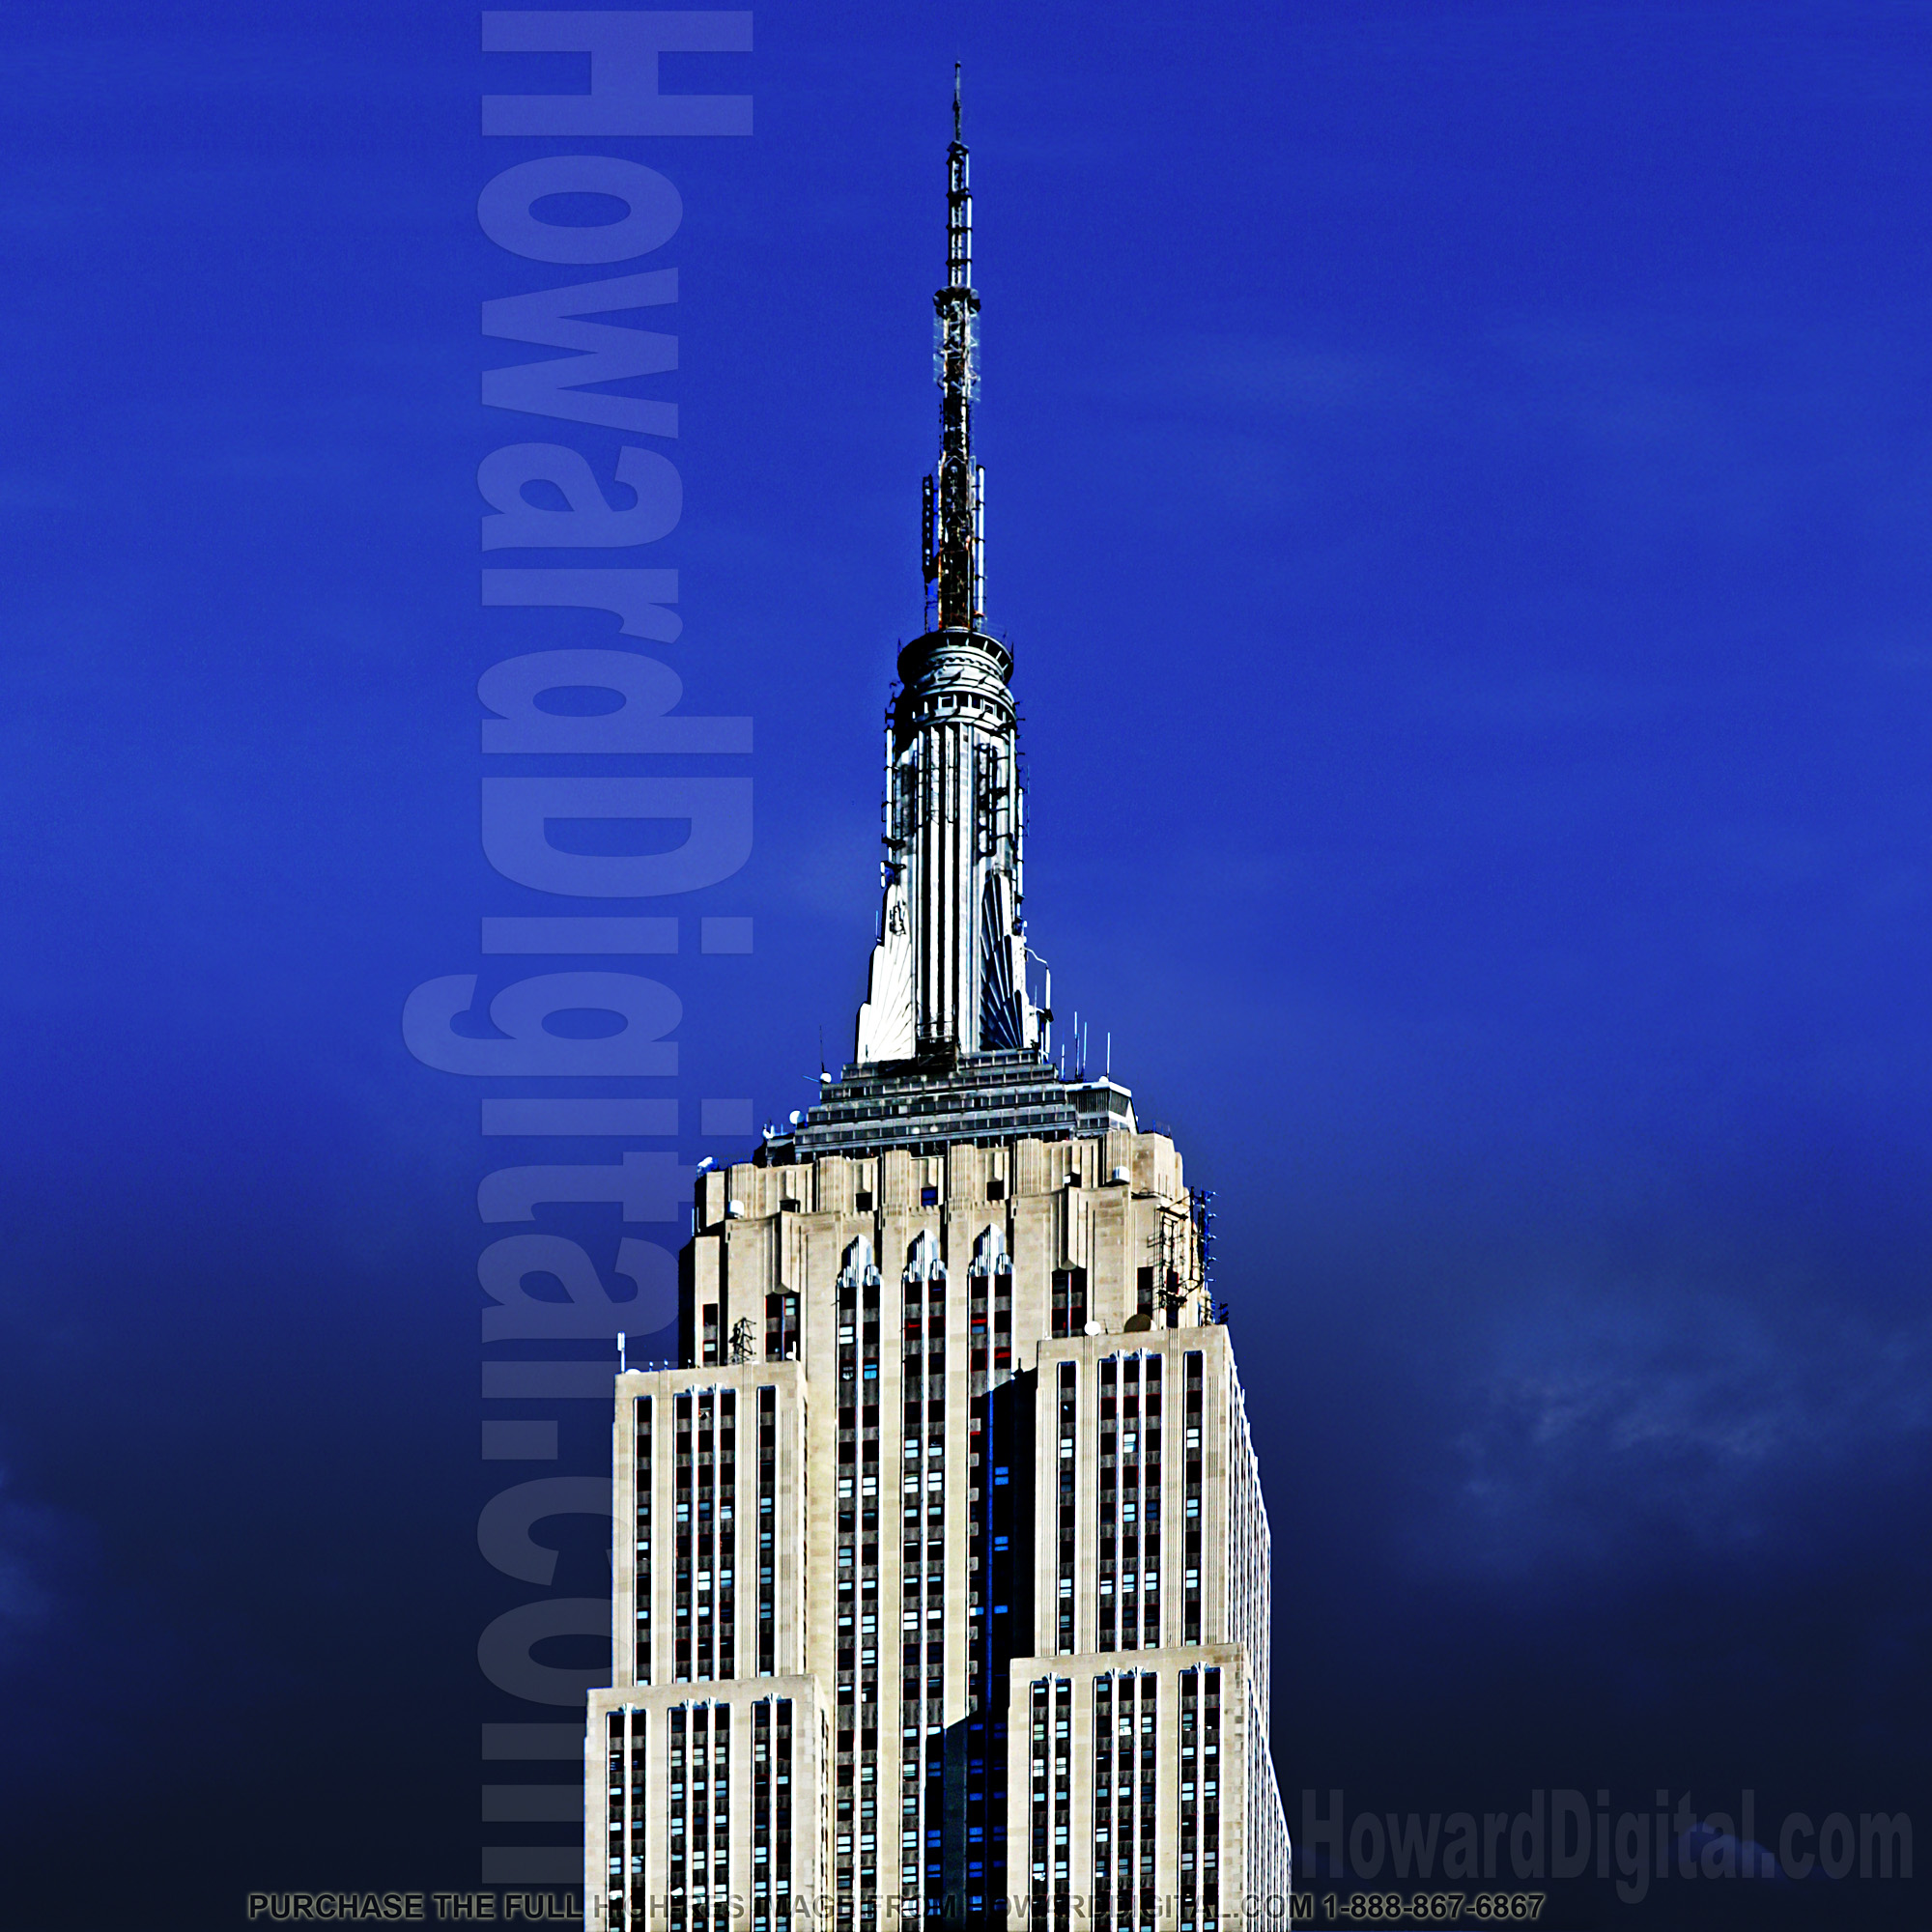 The empire state building and chrysler building design #4